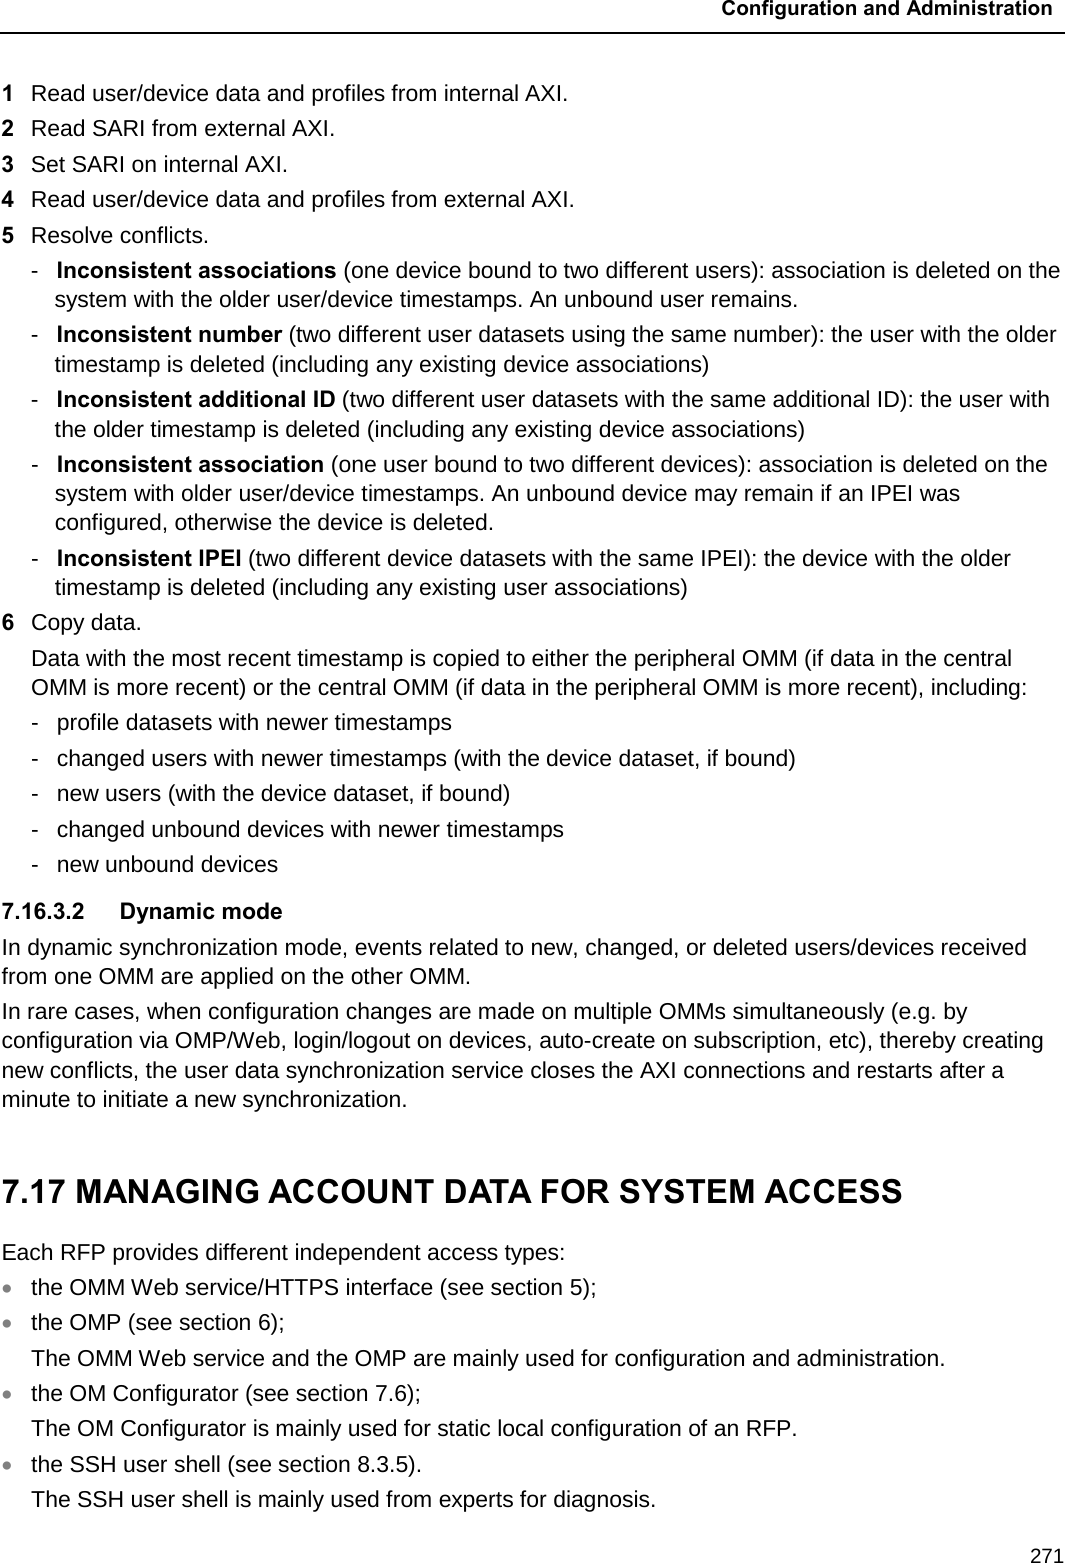  Configuration and Administration  271 1  Read user/device data and profiles from internal AXI.  2  Read SARI from external AXI.  3  Set SARI on internal AXI.  4  Read user/device data and profiles from external AXI.  5  Resolve conflicts. -  Inconsistent associations (one device bound to two different users): association is deleted on the system with the older user/device timestamps. An unbound user remains.   -  Inconsistent number (two different user datasets using the same number): the user with the older timestamp is deleted (including any existing device associations)   -  Inconsistent additional ID (two different user datasets with the same additional ID): the user with the older timestamp is deleted (including any existing device associations)  -  Inconsistent association (one user bound to two different devices): association is deleted on the system with older user/device timestamps. An unbound device may remain if an IPEI was configured, otherwise the device is deleted.  -  Inconsistent IPEI (two different device datasets with the same IPEI): the device with the older timestamp is deleted (including any existing user associations)  6  Copy data.  Data with the most recent timestamp is copied to either the peripheral OMM (if data in the central OMM is more recent) or the central OMM (if data in the peripheral OMM is more recent), including: -  profile datasets with newer timestamps  -  changed users with newer timestamps (with the device dataset, if bound) -  new users (with the device dataset, if bound) -  changed unbound devices with newer timestamps -  new unbound devices 7.16.3.2 Dynamic mode In dynamic synchronization mode, events related to new, changed, or deleted users/devices received from one OMM are applied on the other OMM.  In rare cases, when configuration changes are made on multiple OMMs simultaneously (e.g. by configuration via OMP/Web, login/logout on devices, auto-create on subscription, etc), thereby creating new conflicts, the user data synchronization service closes the AXI connections and restarts after a minute to initiate a new synchronization.  7.17 MANAGING ACCOUNT DATA FOR SYSTEM ACCESS Each RFP provides different independent access types:  • the OMM Web service/HTTPS interface (see section 5); • the OMP (see section 6);  The OMM Web service and the OMP are mainly used for configuration and administration. • the OM Configurator (see section 7.6);  The OM Configurator is mainly used for static local configuration of an RFP. • the SSH user shell (see section 8.3.5). The SSH user shell is mainly used from experts for diagnosis. 